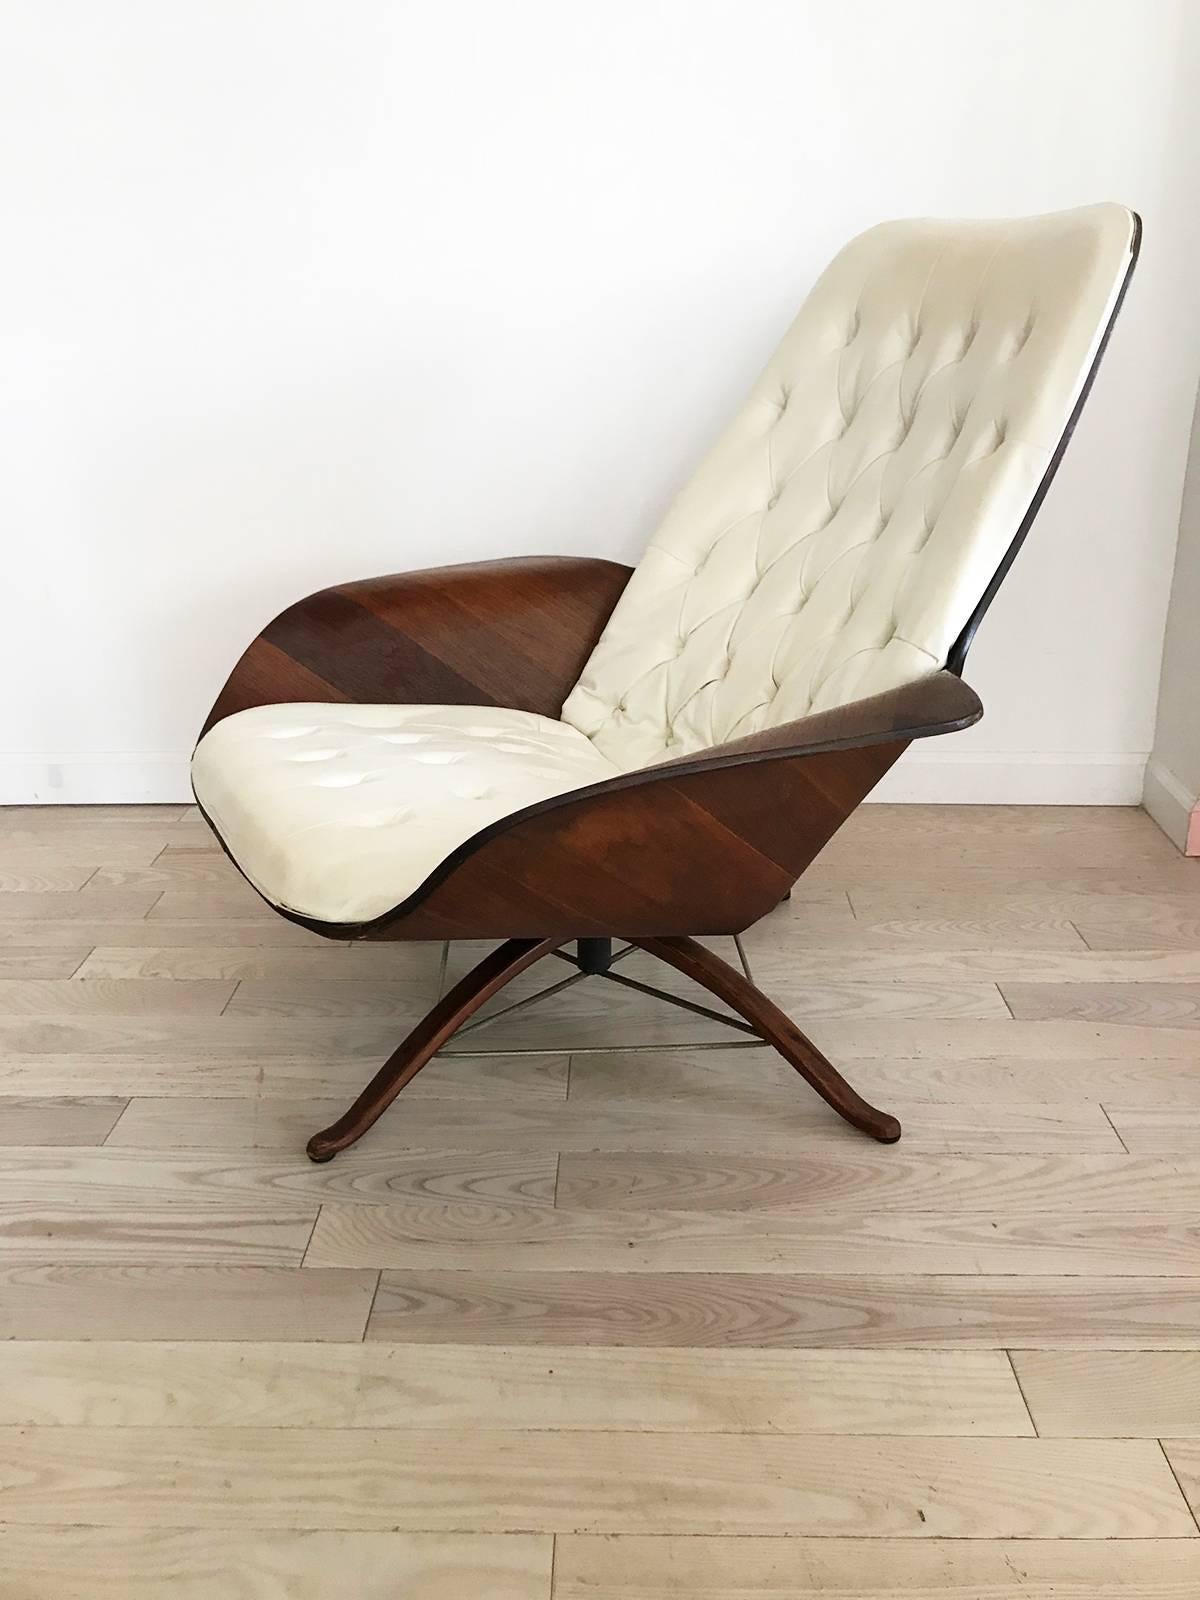 American Midcentury Cream Plycraft Mr. Chair by George Mulhauser Lounge Chair